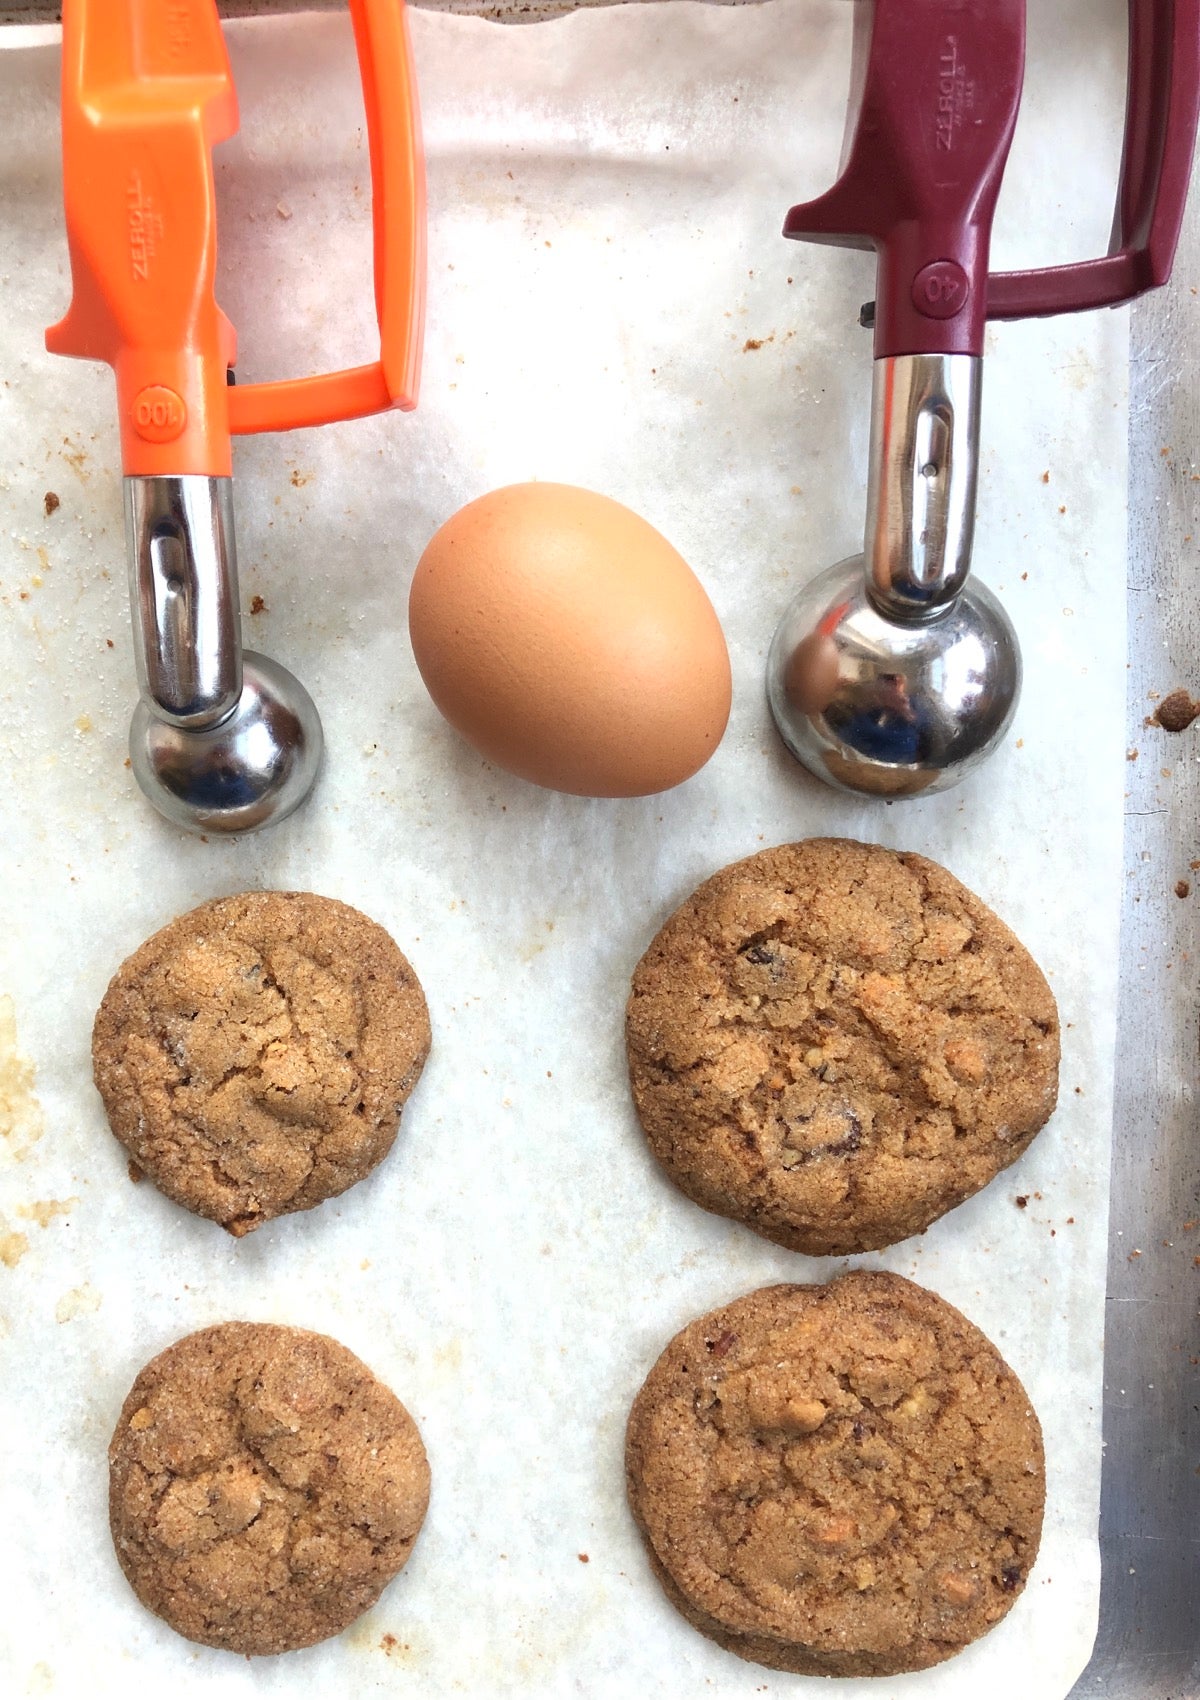 Two cookies on a baking sheet, one made with a tablespoon scoop, a smaller one made with a teaspoon scoop.